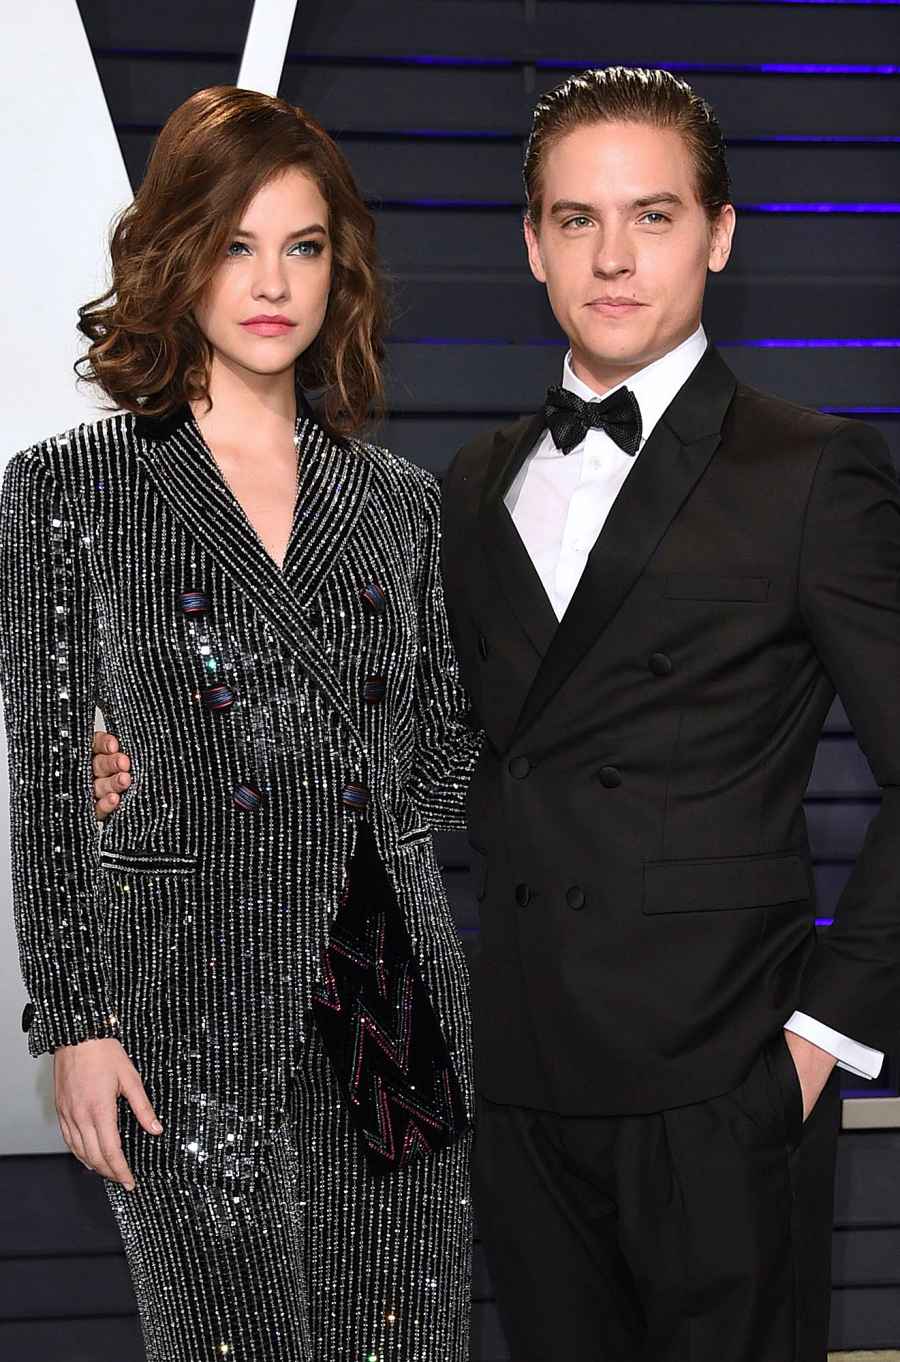 February 2019 Dylan Sprouse and Barbara Palvin Relationship Timeline